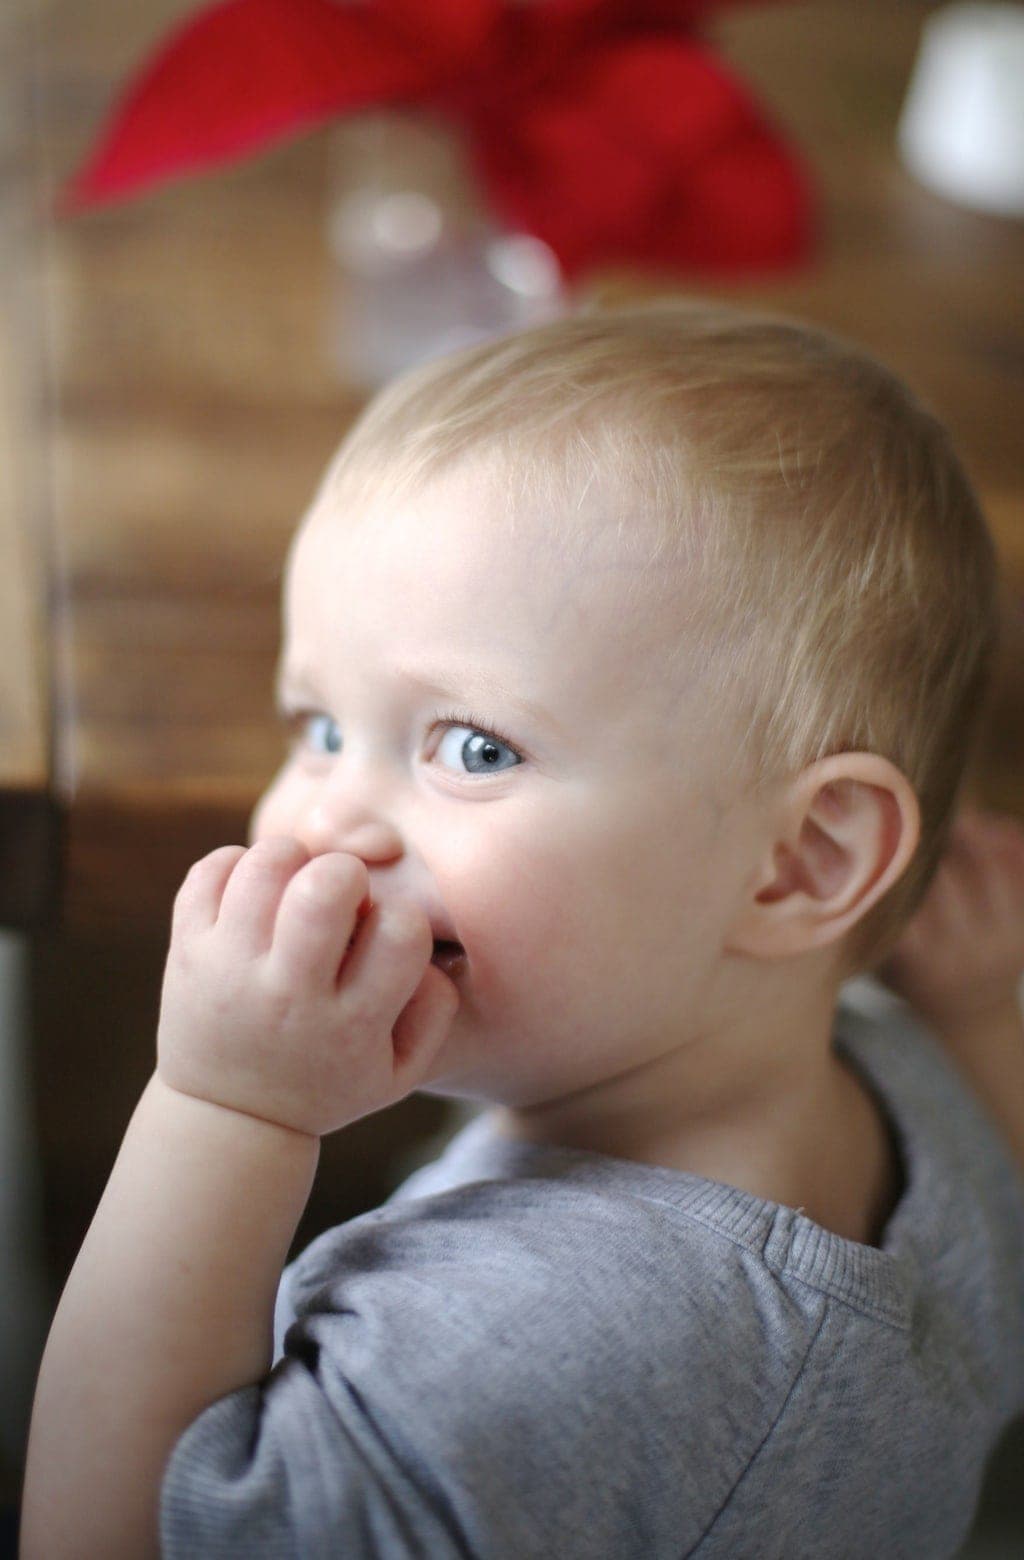 A baby eating a chocolate no bake cookie.